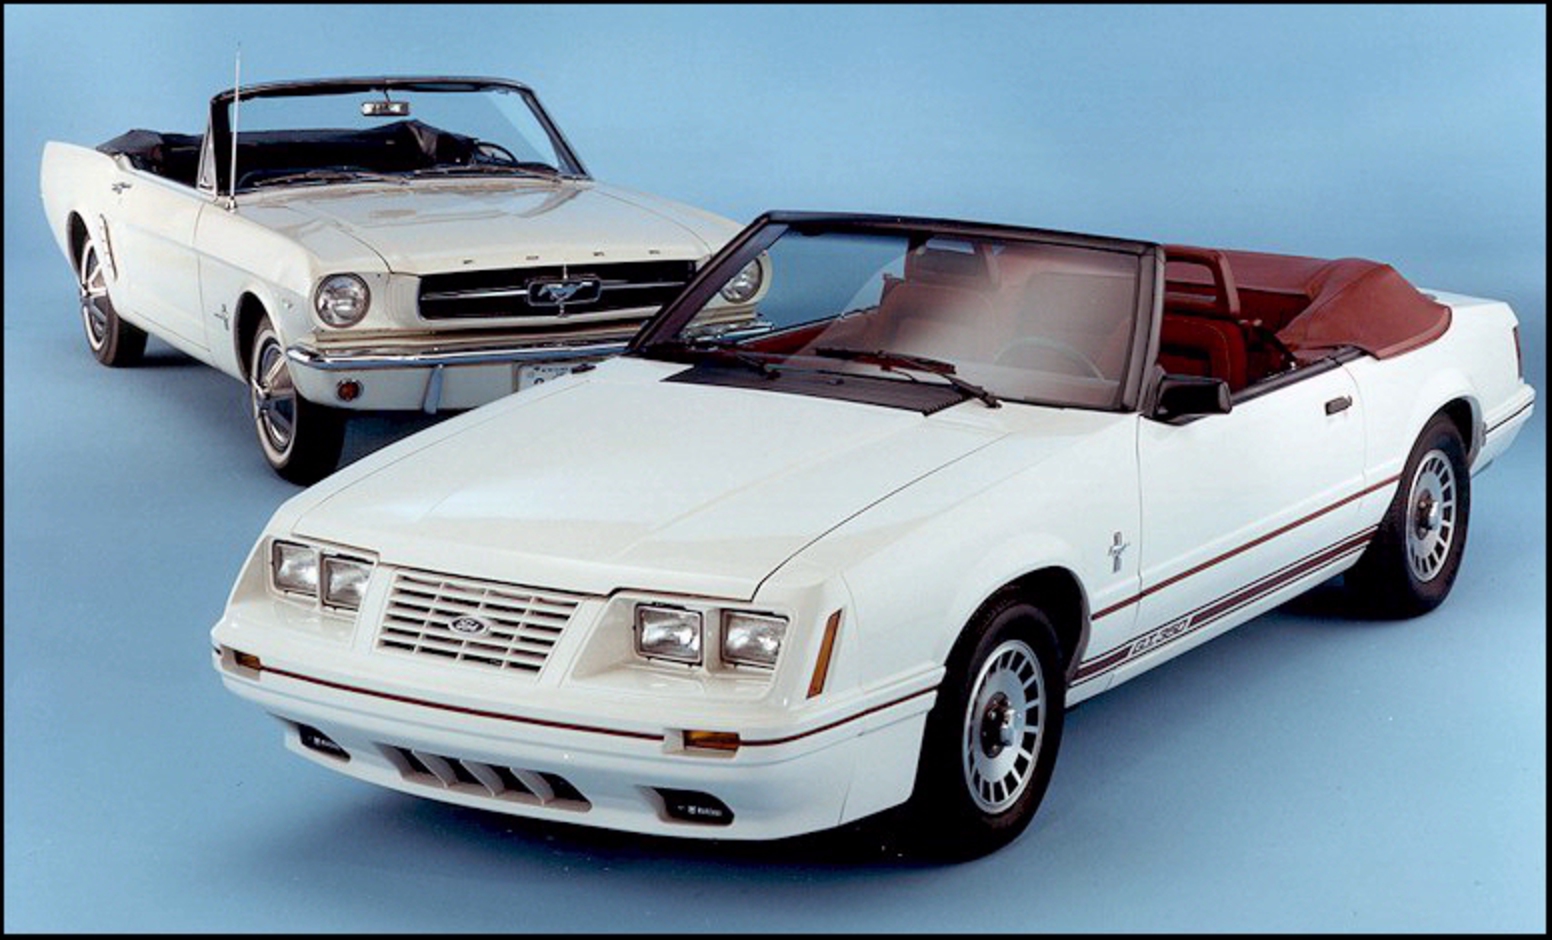 Timeline: 1984 Mustang - The Mustang Source.